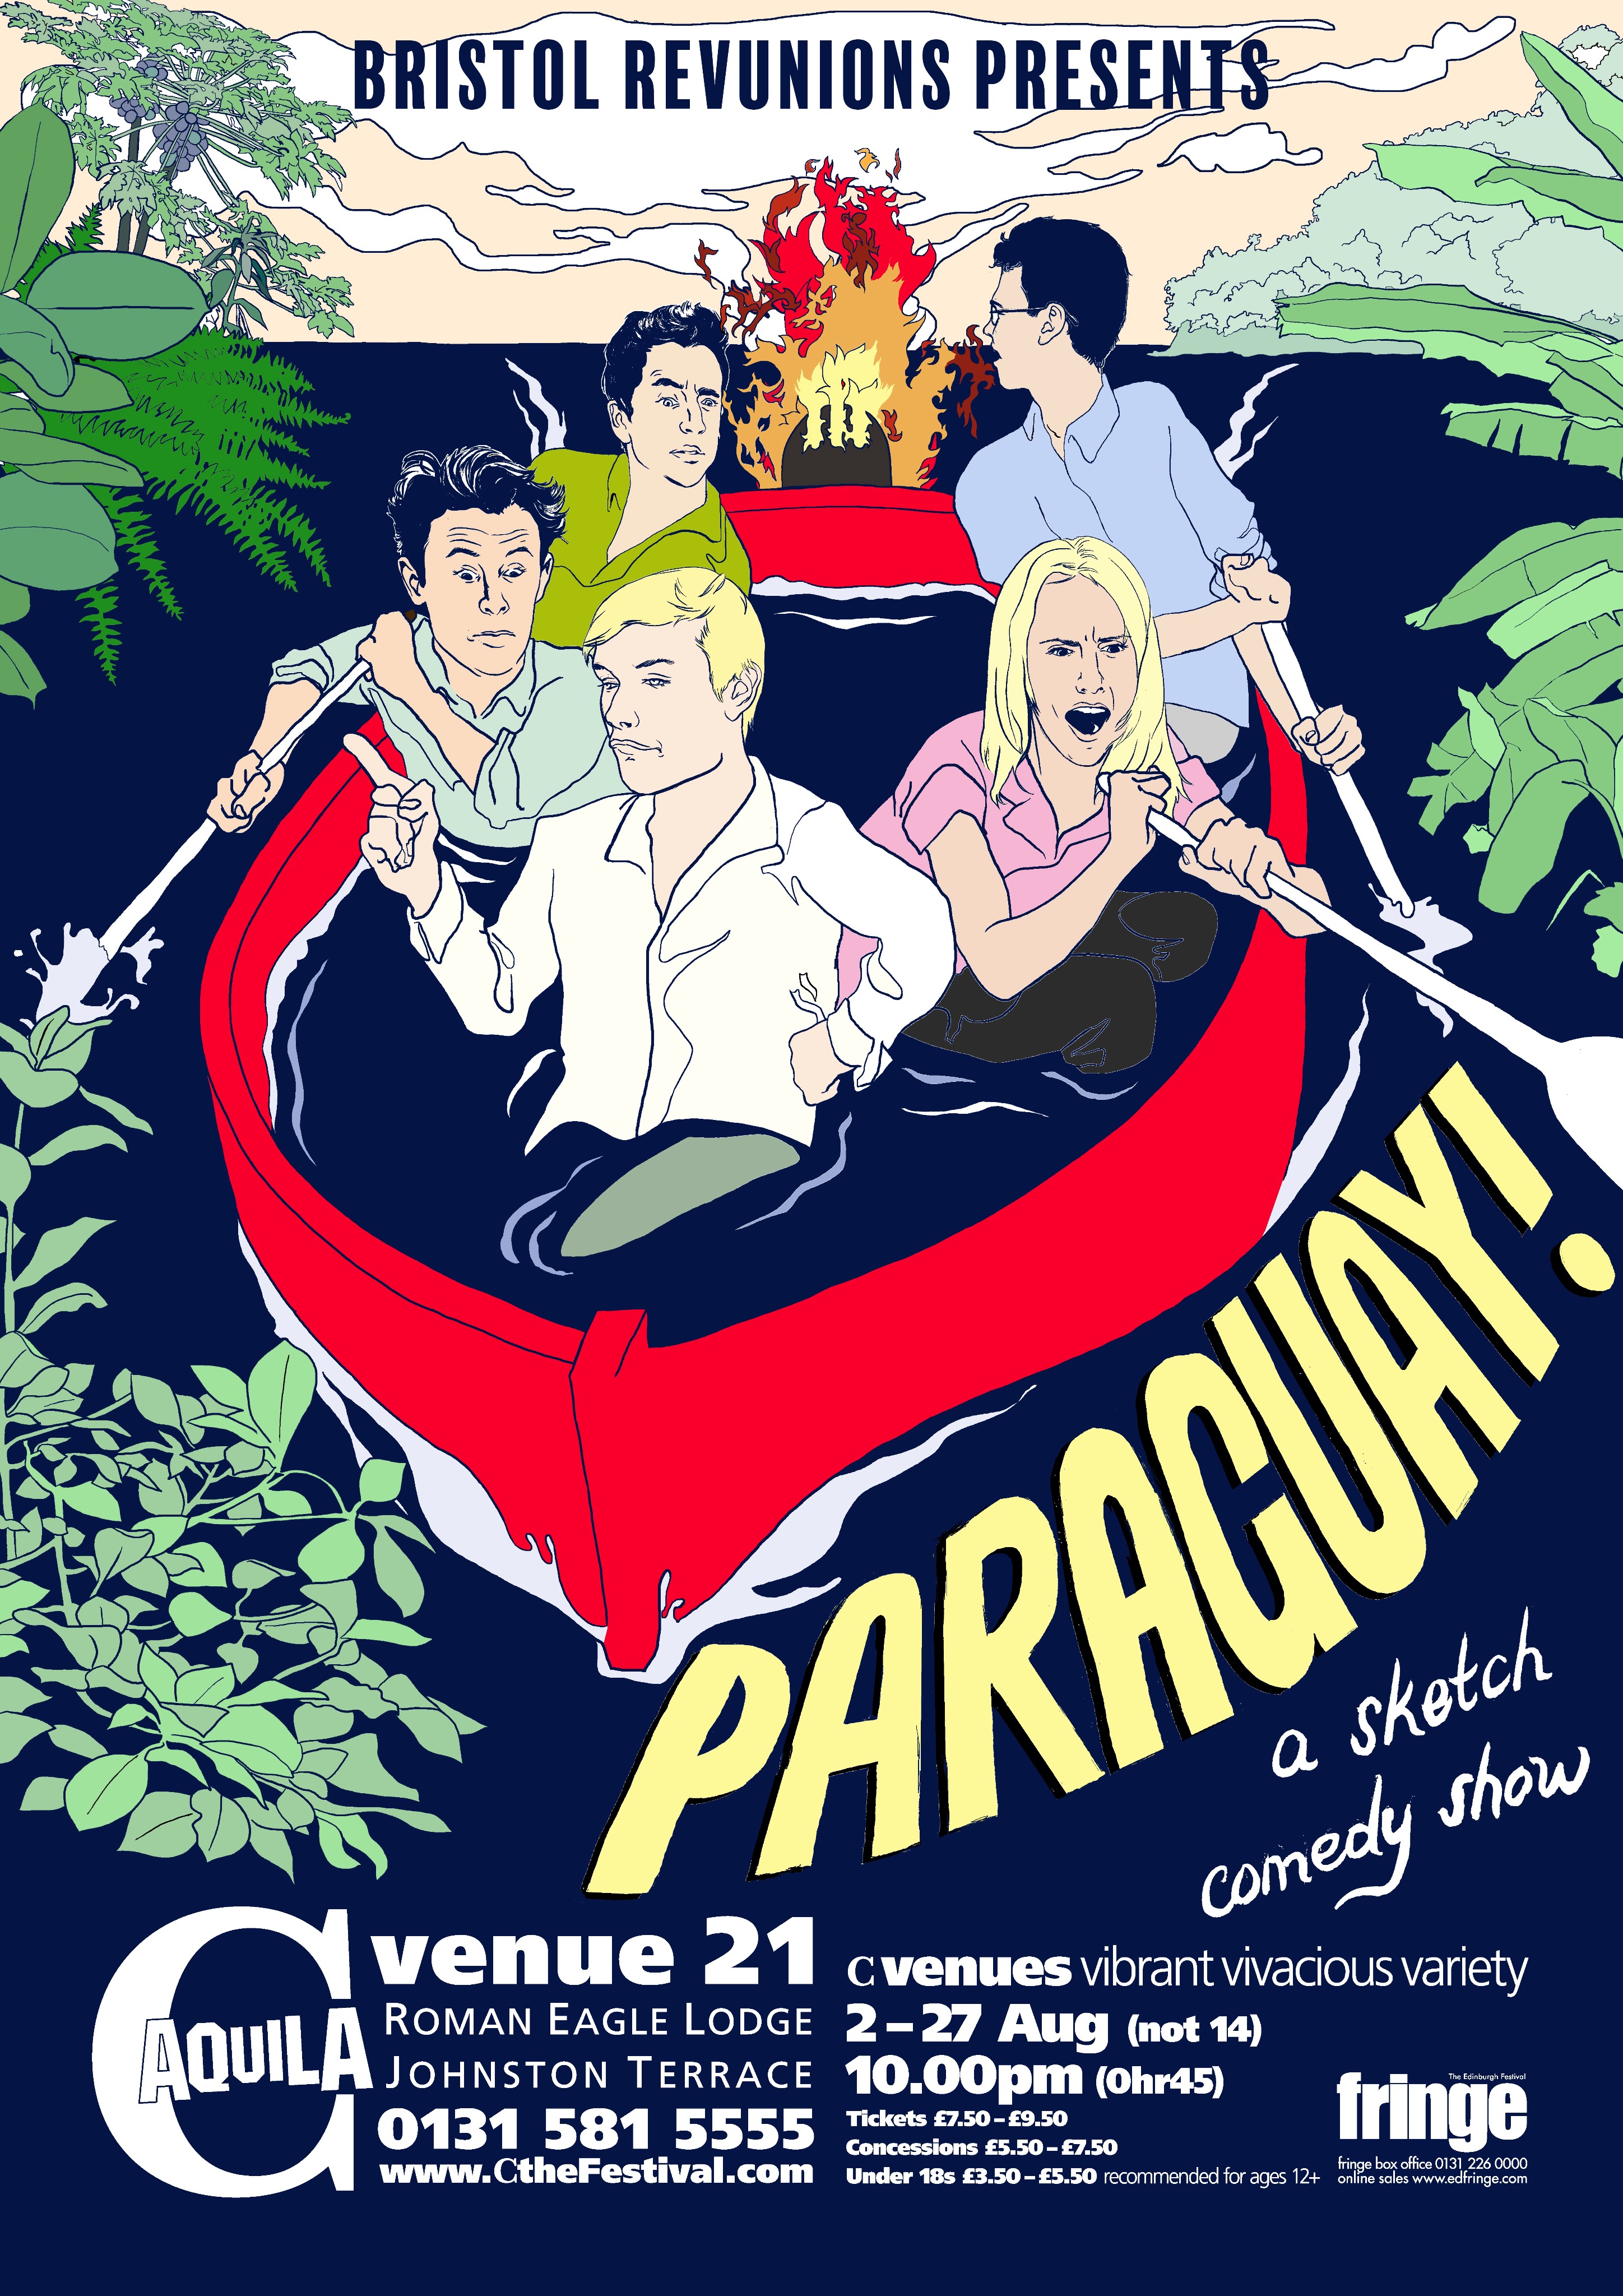 The poster for Bristol Revunions Present: Paraguay